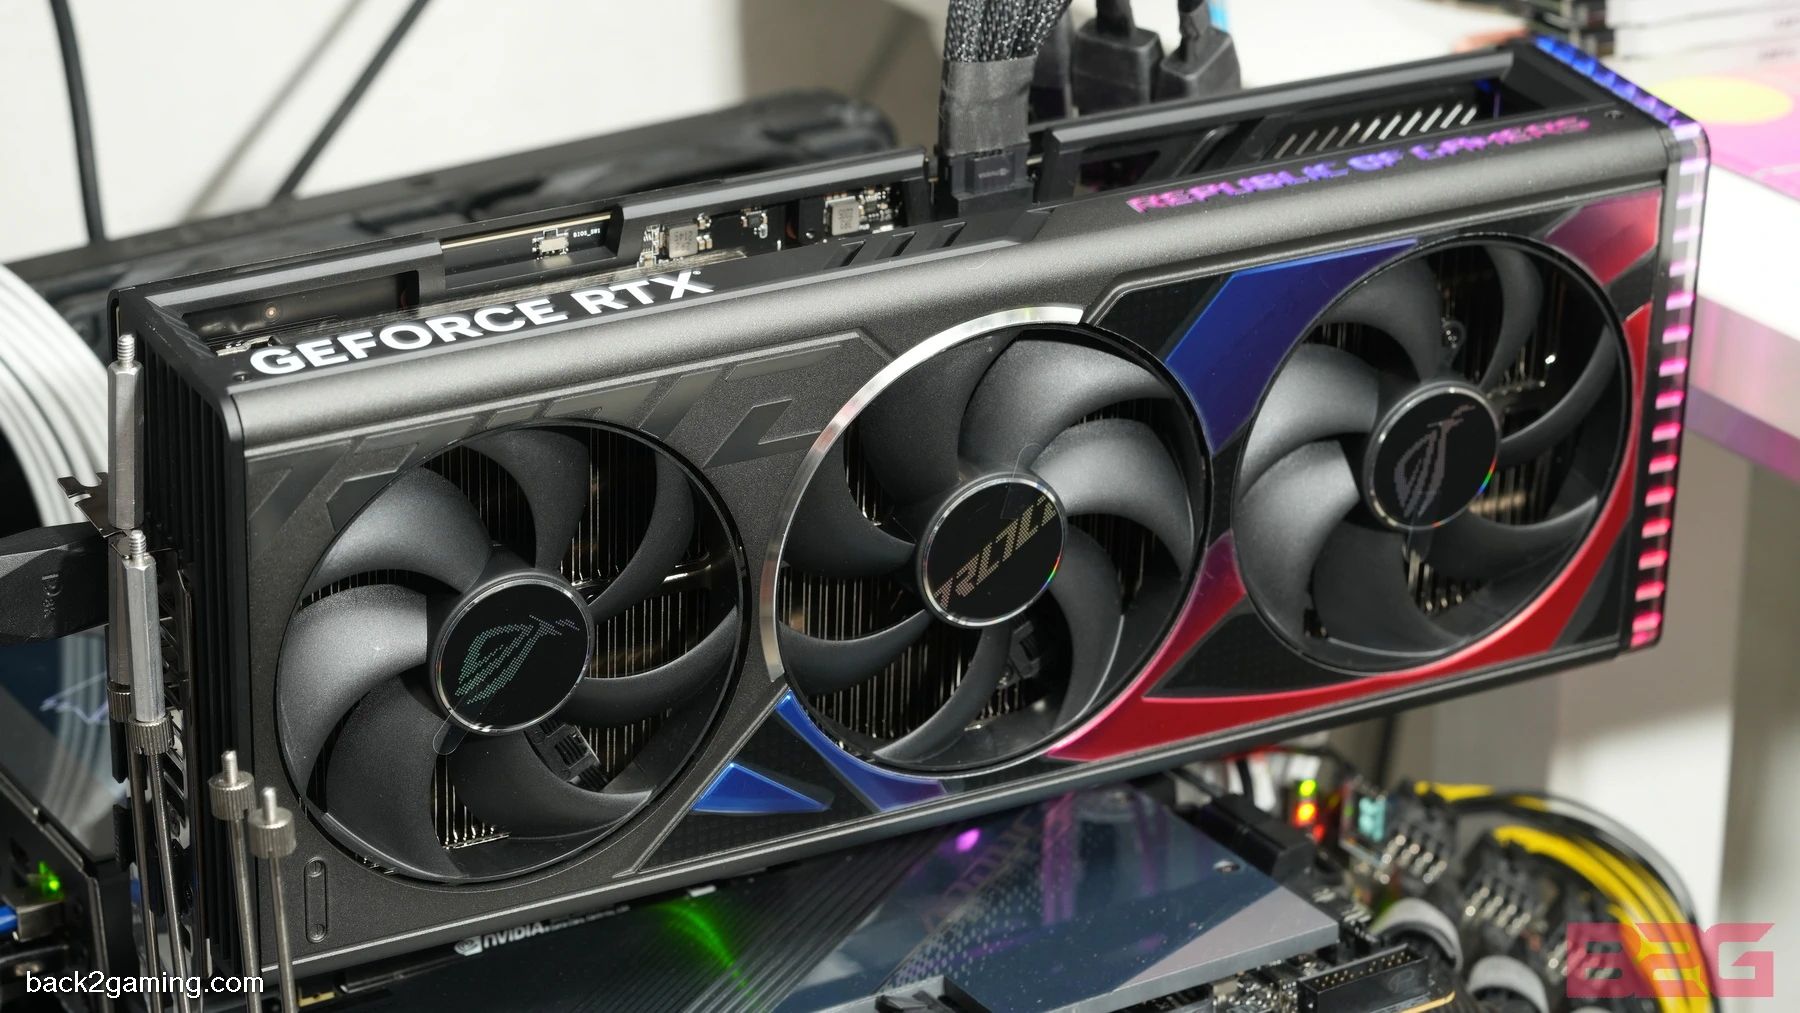 ASUS ROG STRIX RTX 4080 OC 16GB Graphics Card Review -